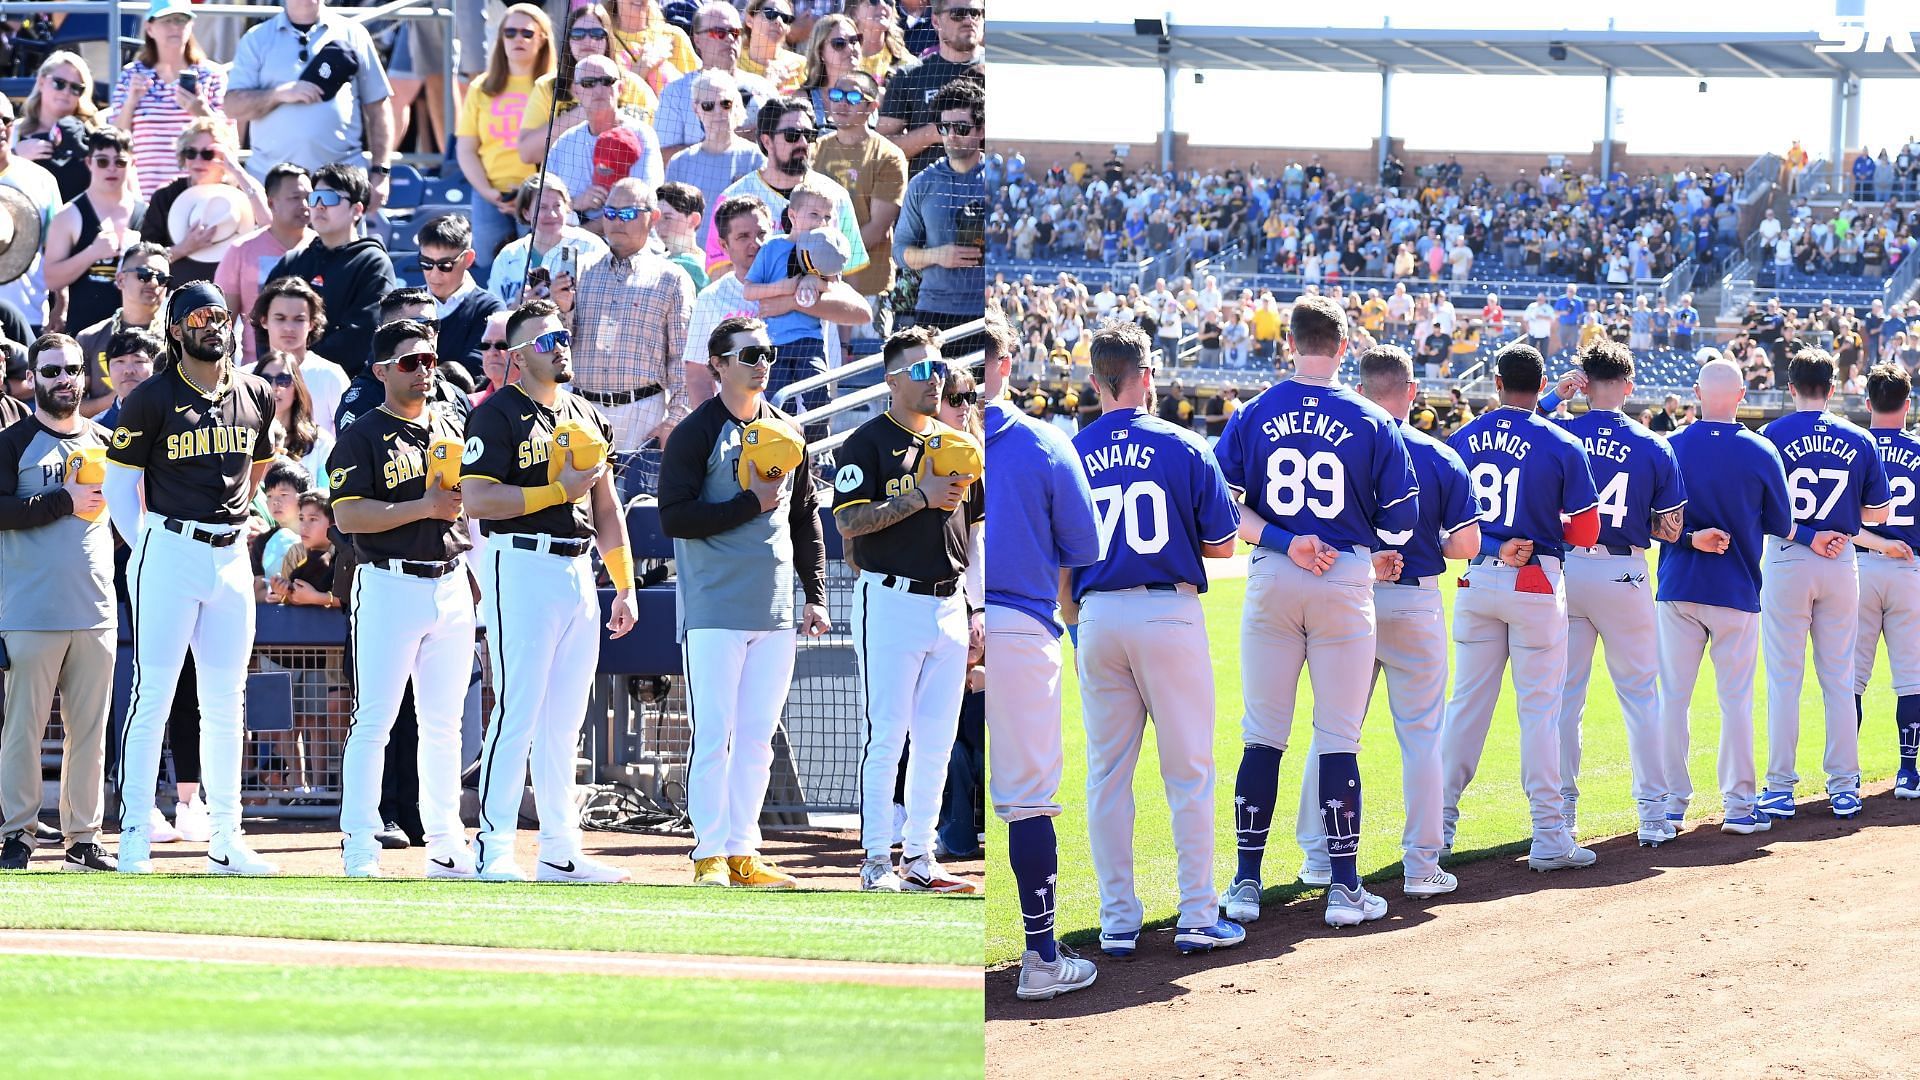 The Los Angeles Dodgers and the San Diego Padres stand during the singing of the national anthem prior to a spring training game at the Peoria Sports Complex